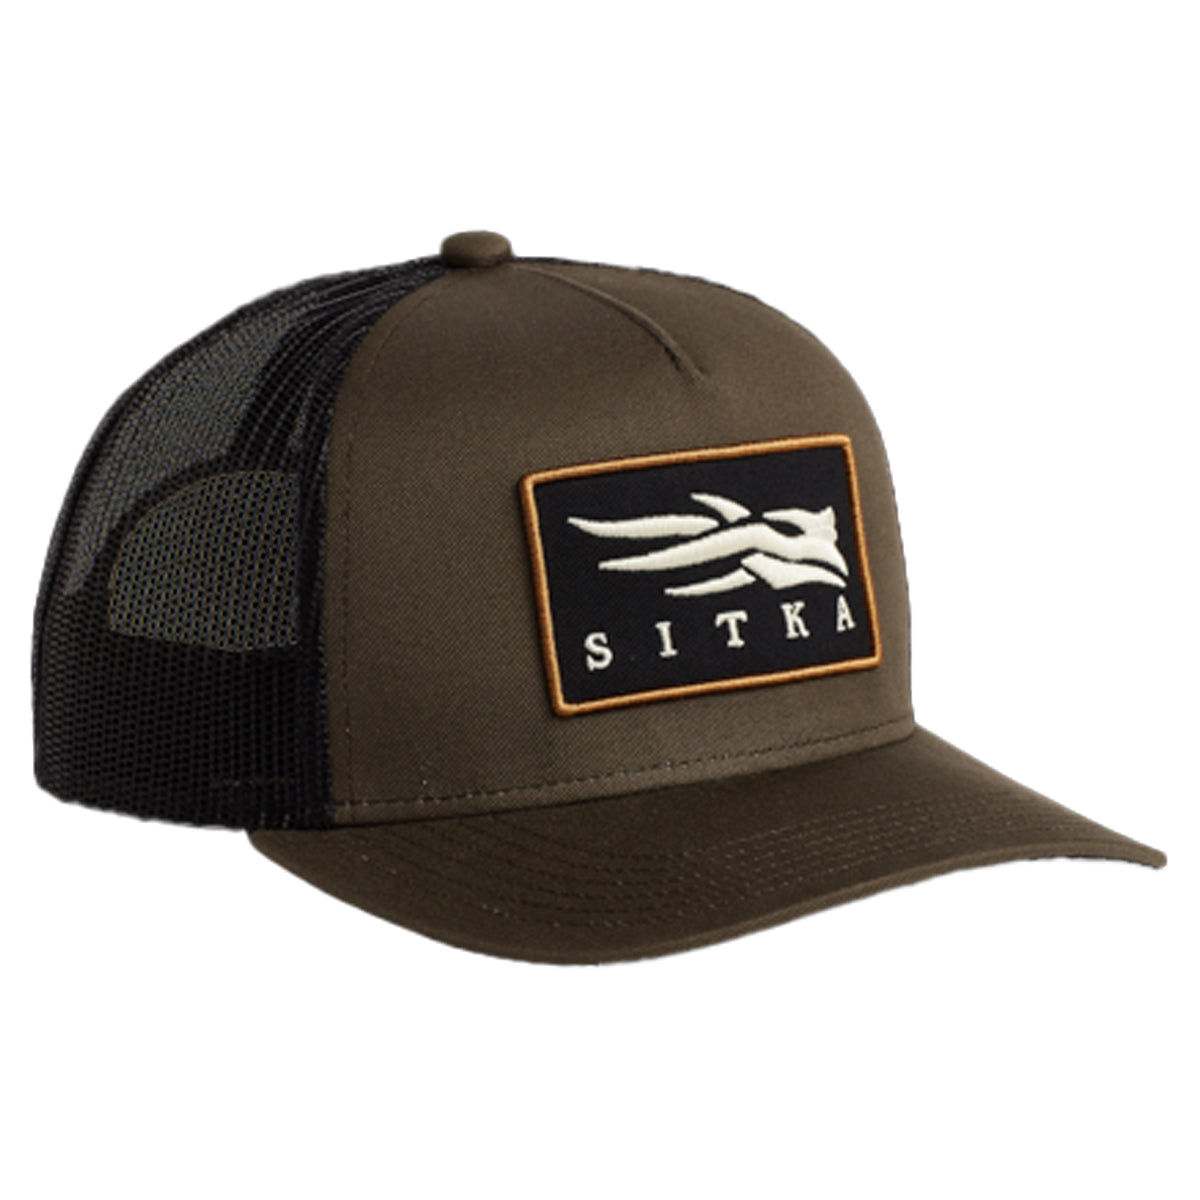 Sitka ICON Patch Hi Pro Trucker in Bark by GOHUNT | Sitka - GOHUNT Shop